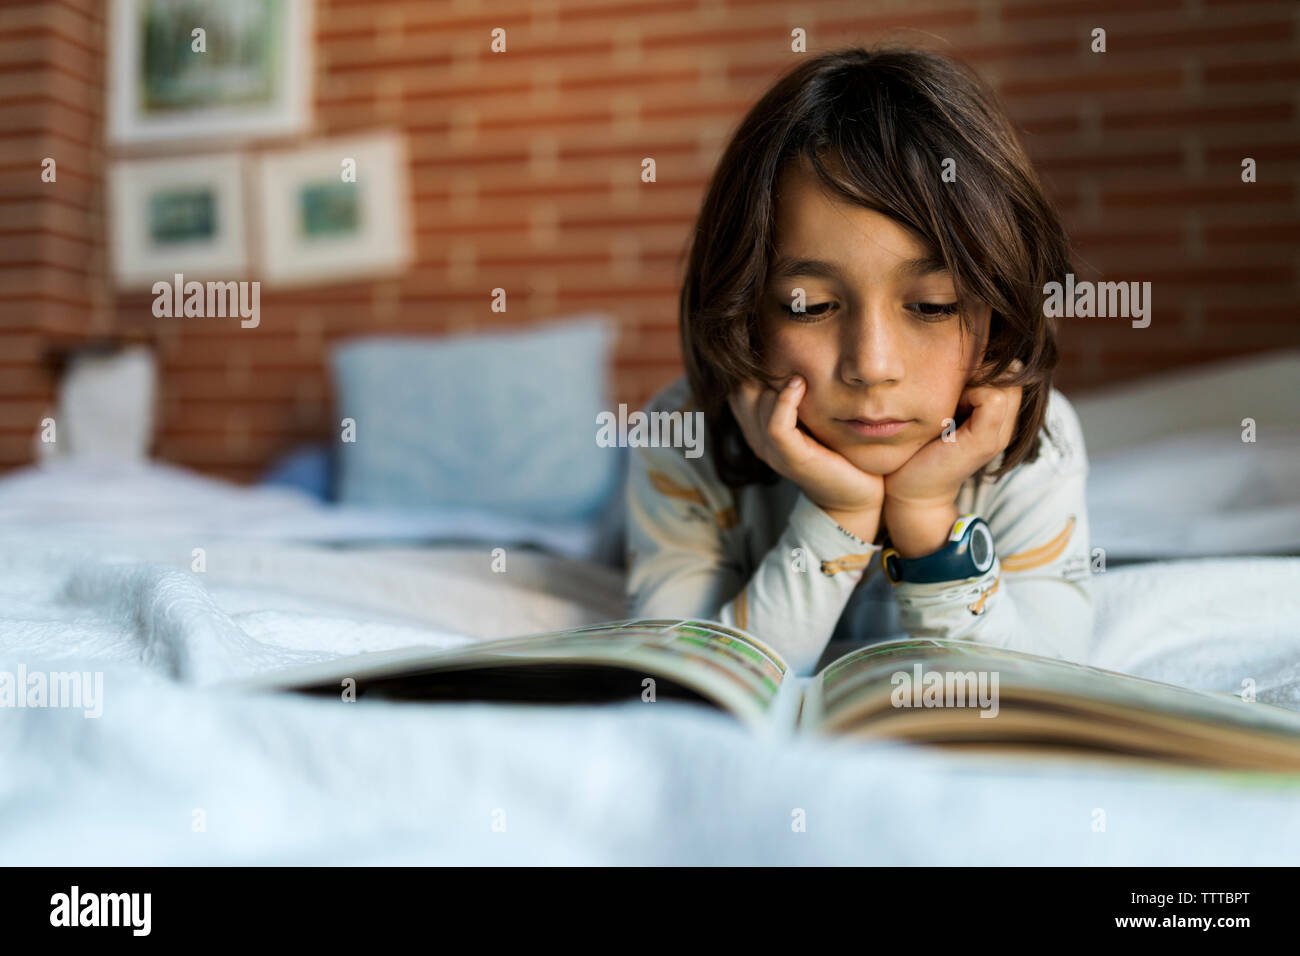 Kid reading a book laying on bed Stock Photo